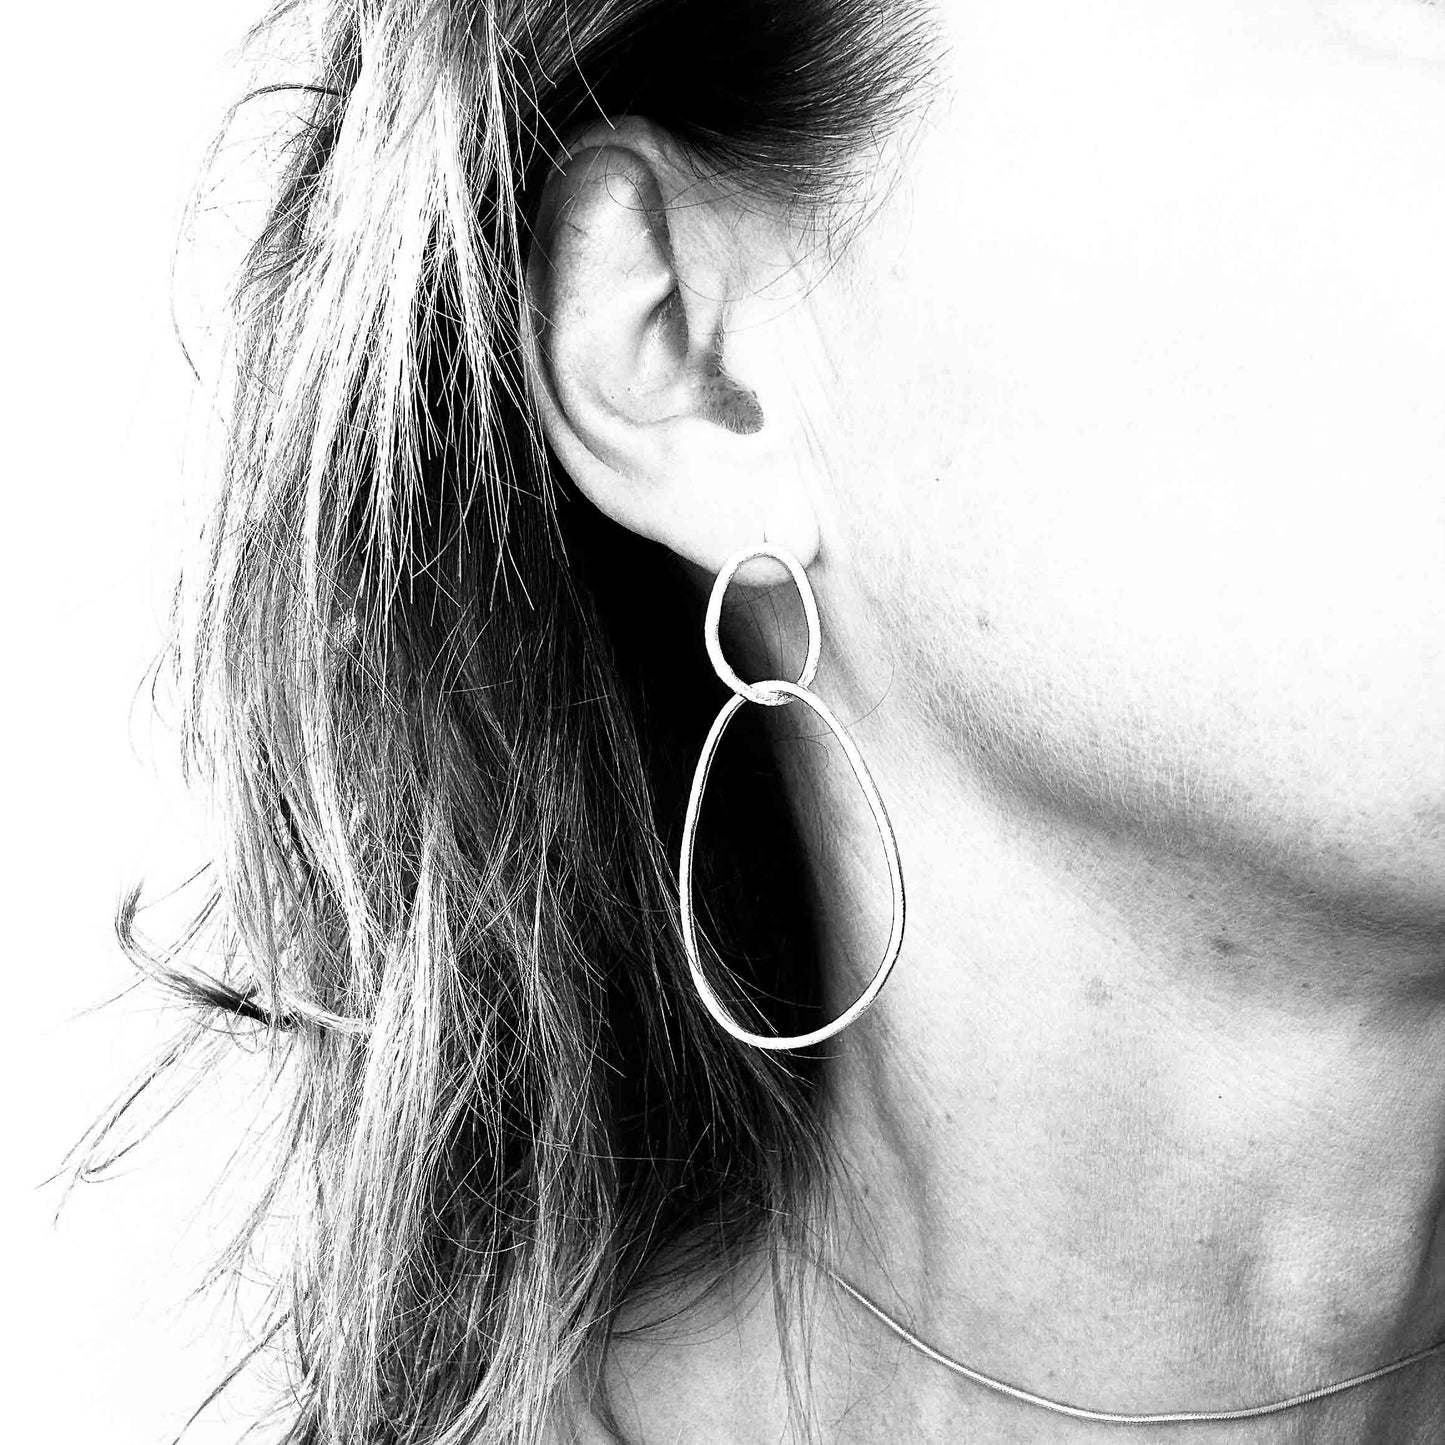 long minimalist dangly earrings in 925 sterling silver with organic shapes, short length